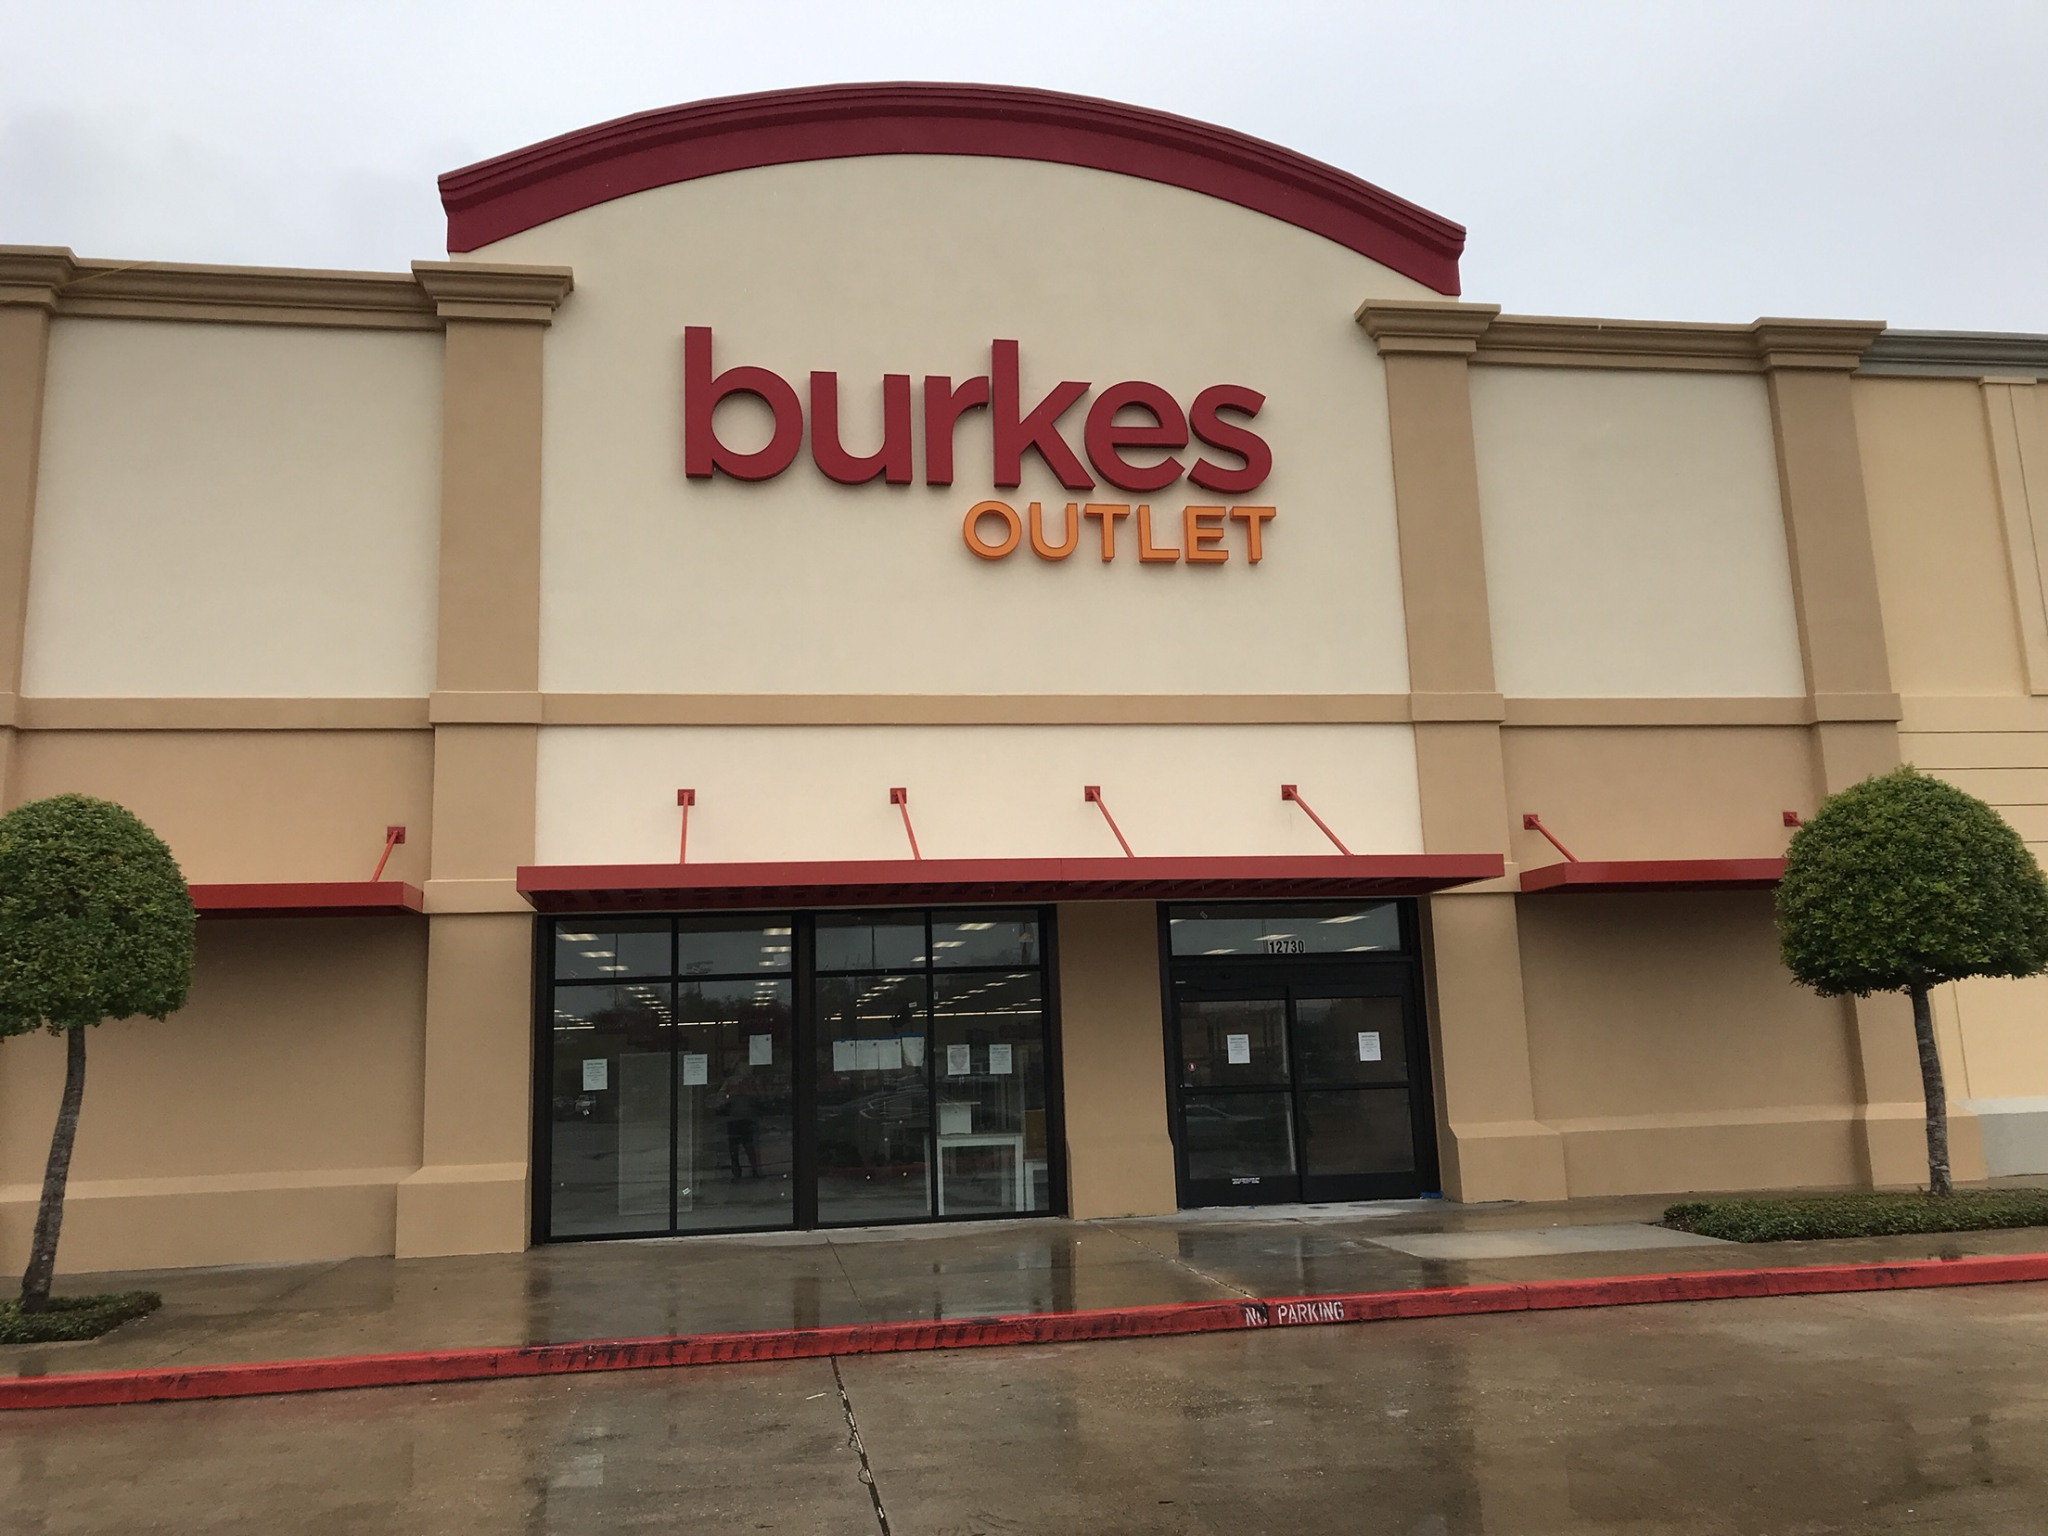 Burkes Outlet to open Stafford store - Houston Chronicle2048 x 1536